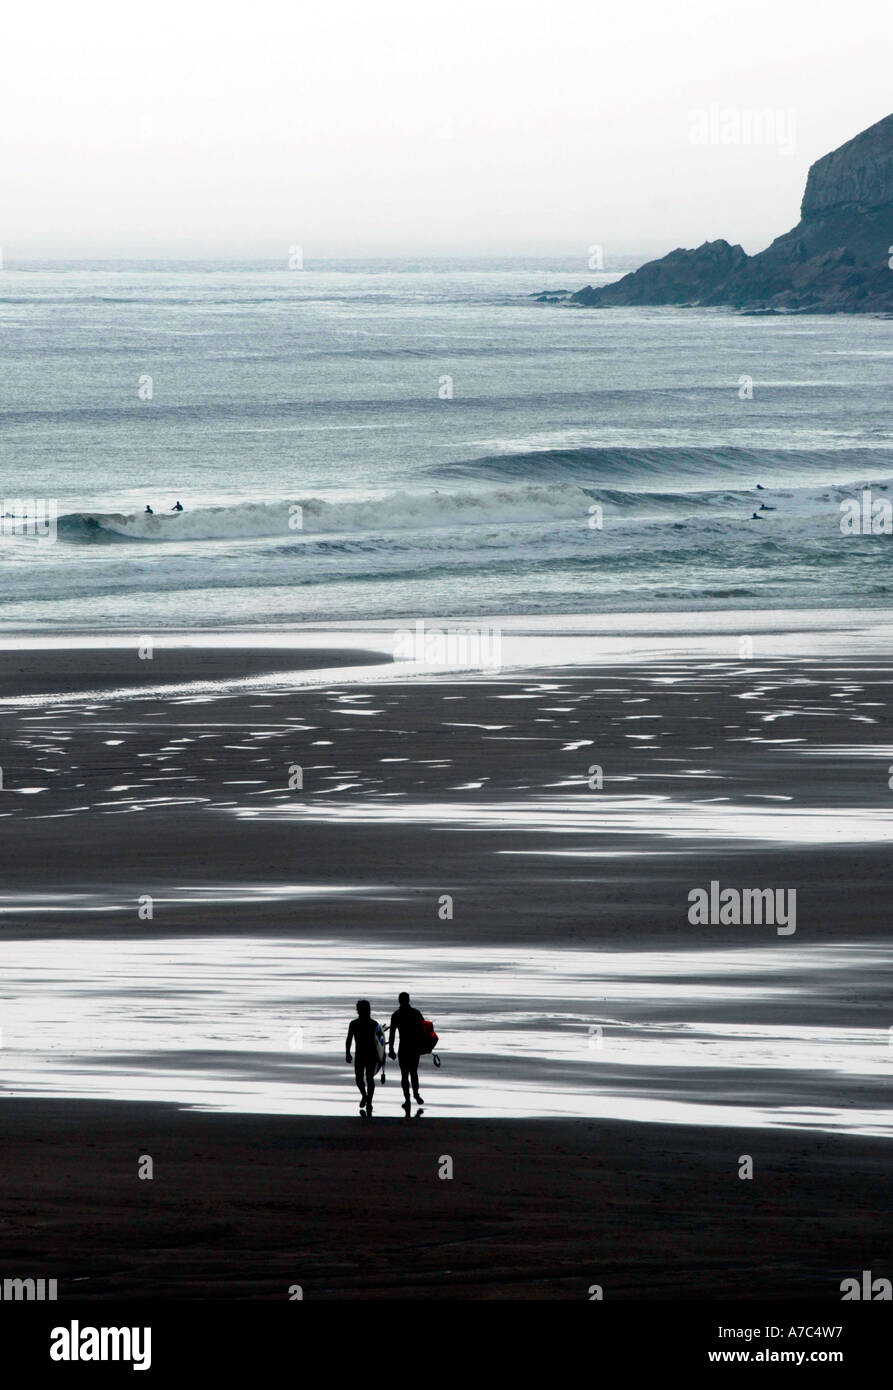 Two surfer silhouetted walking along beach Stock Photo